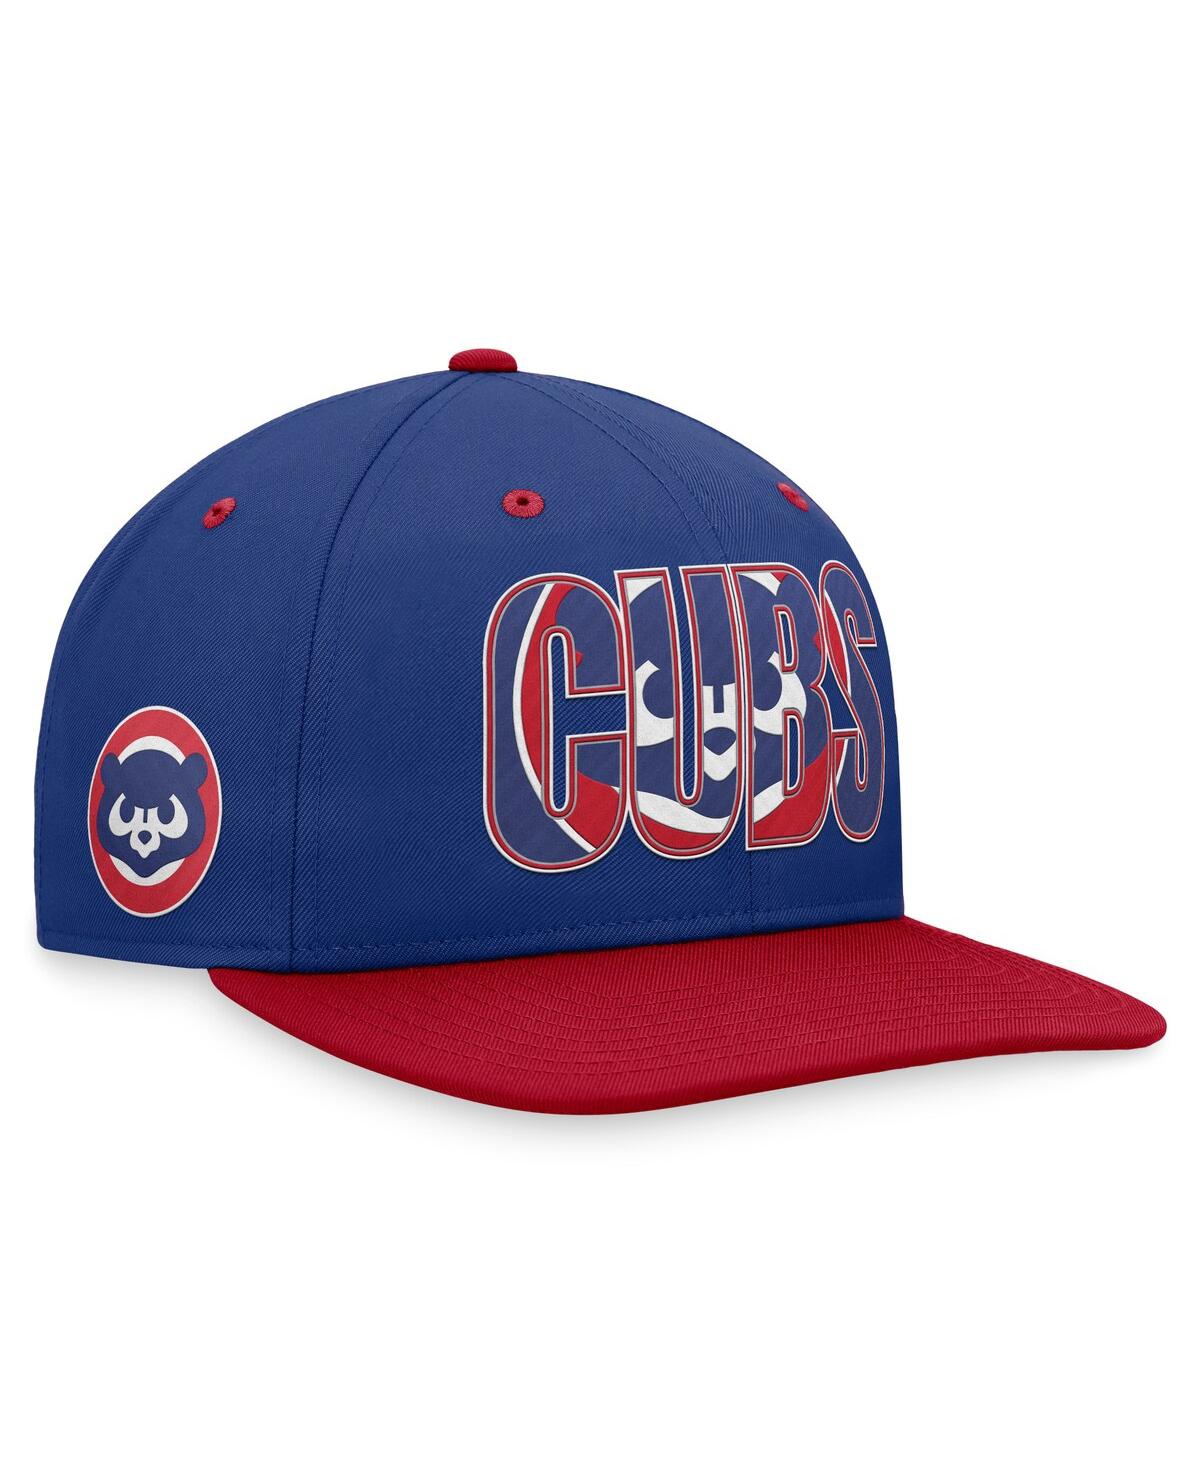 Nike Men's  Royal Chicago Cubs Cooperstown Collection Pro Snapback Hat